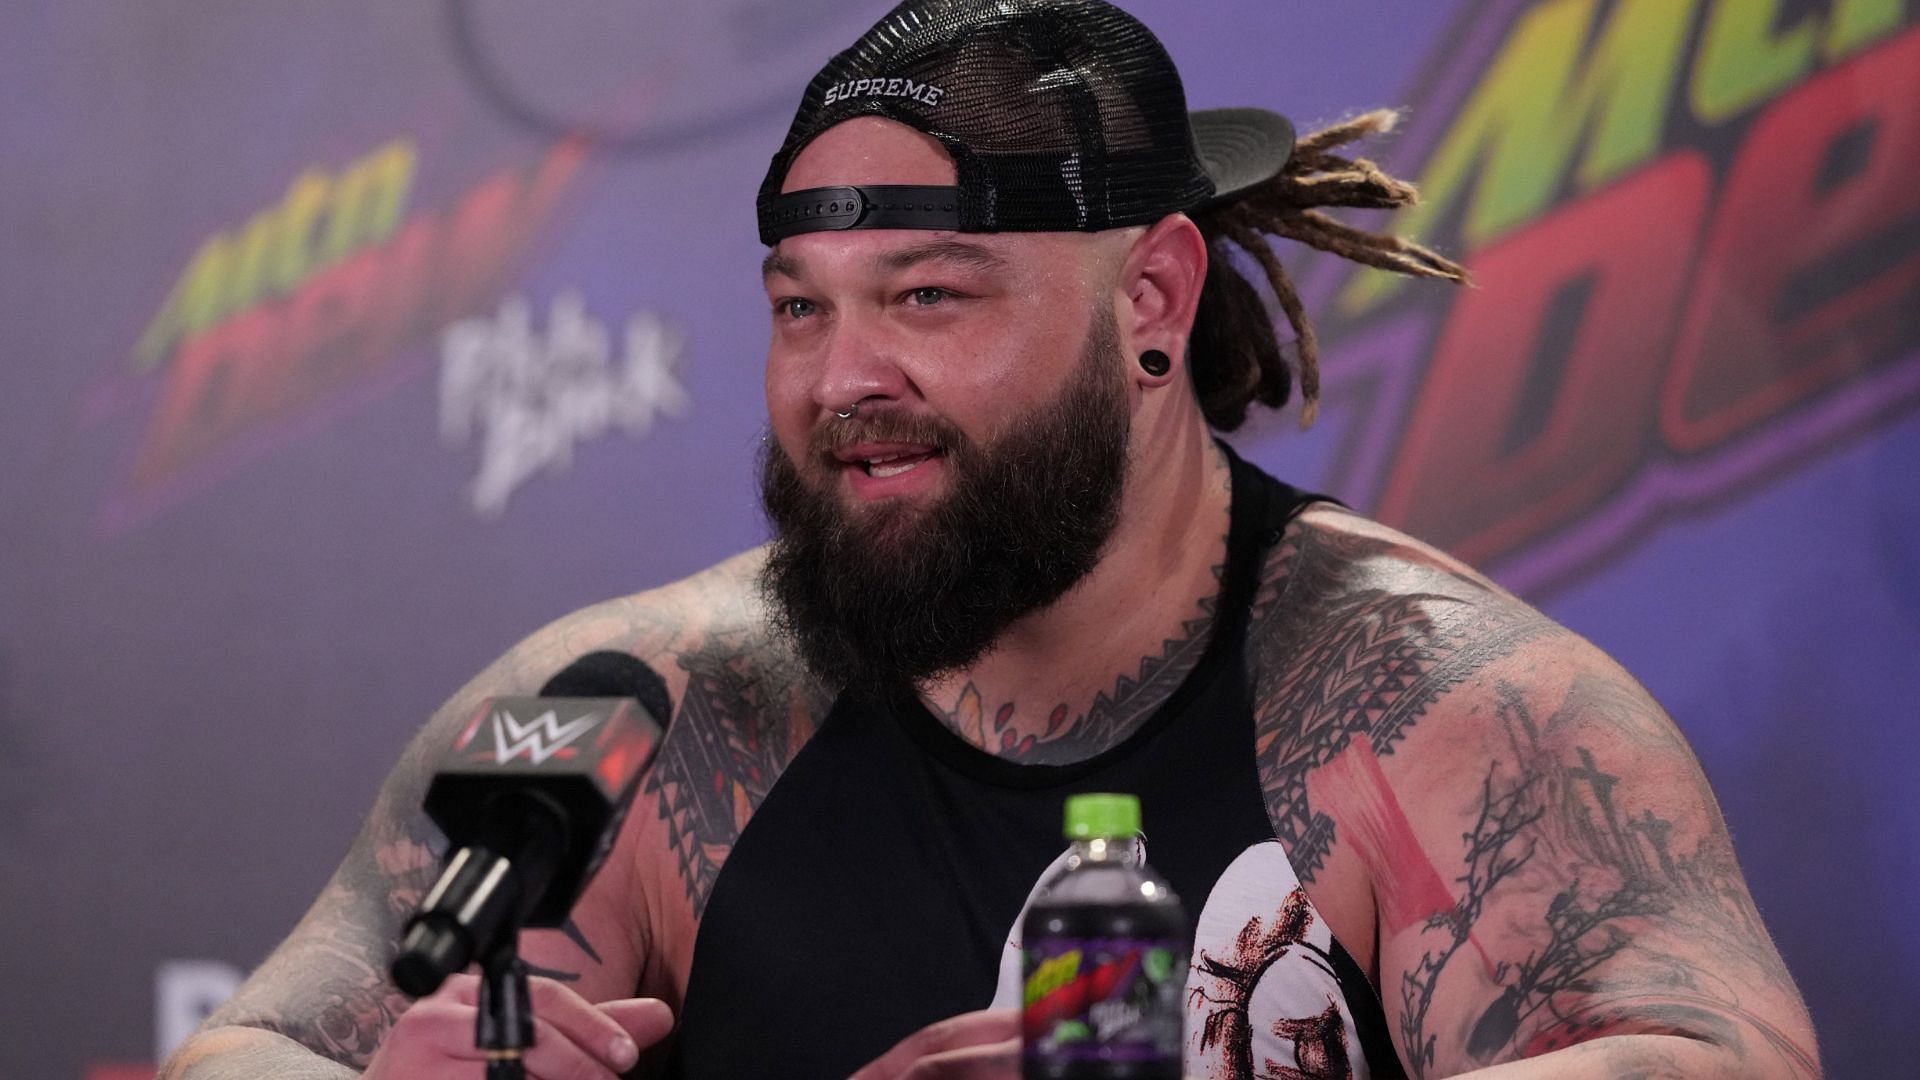 AEW personality shares her thoughts on tribute to Bray Wyatt.